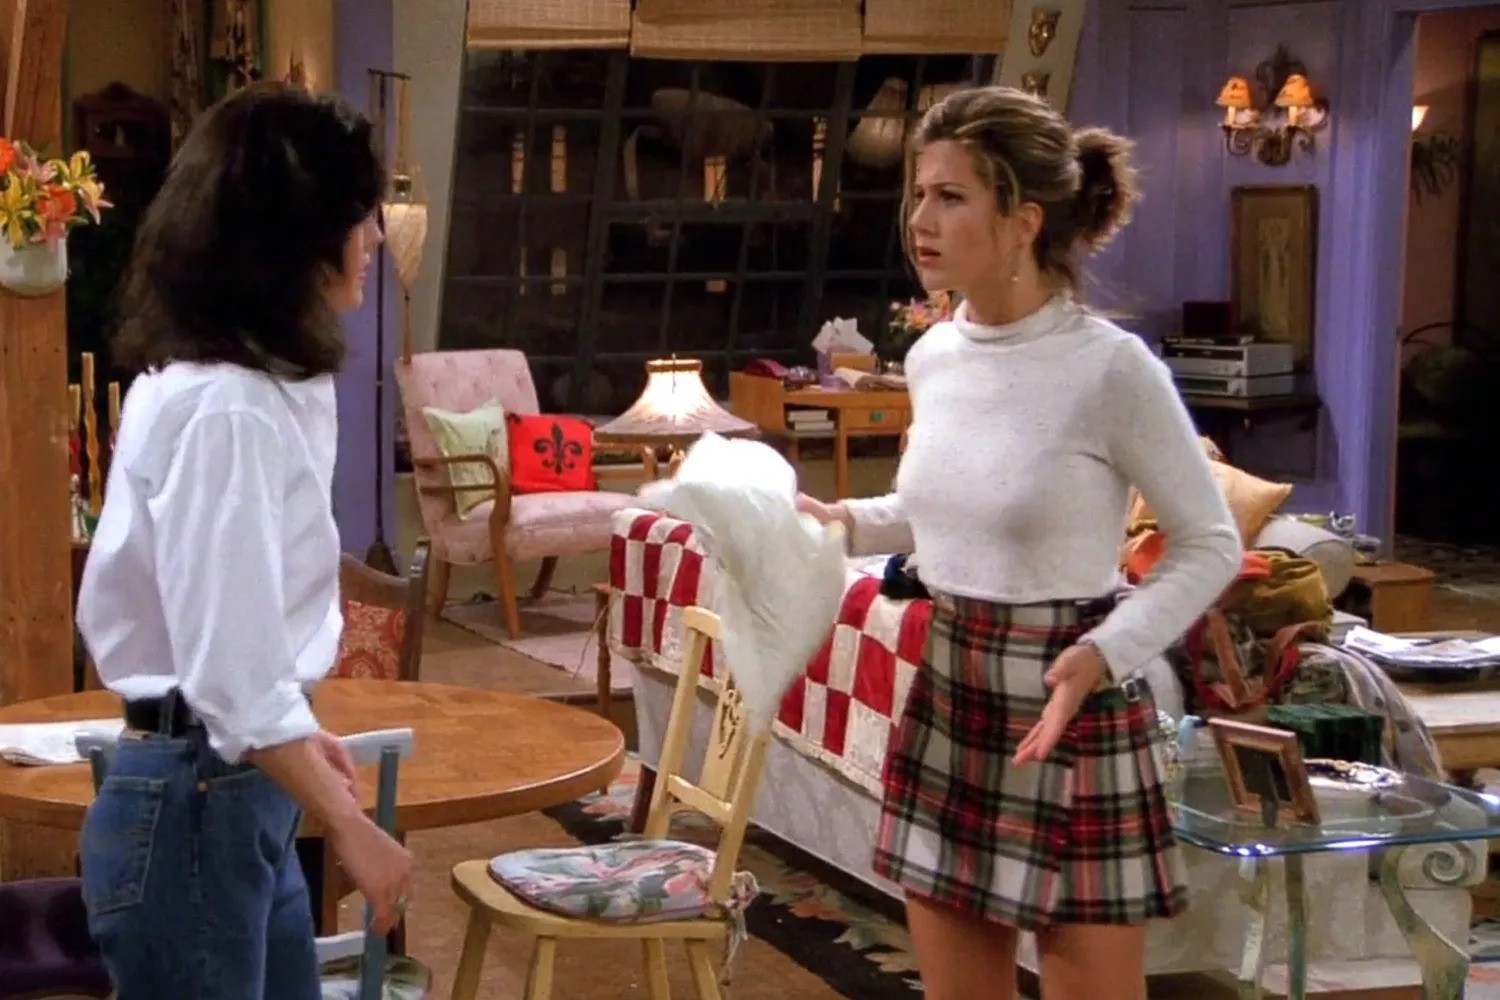 Rache Green in a white top and plaid skirt